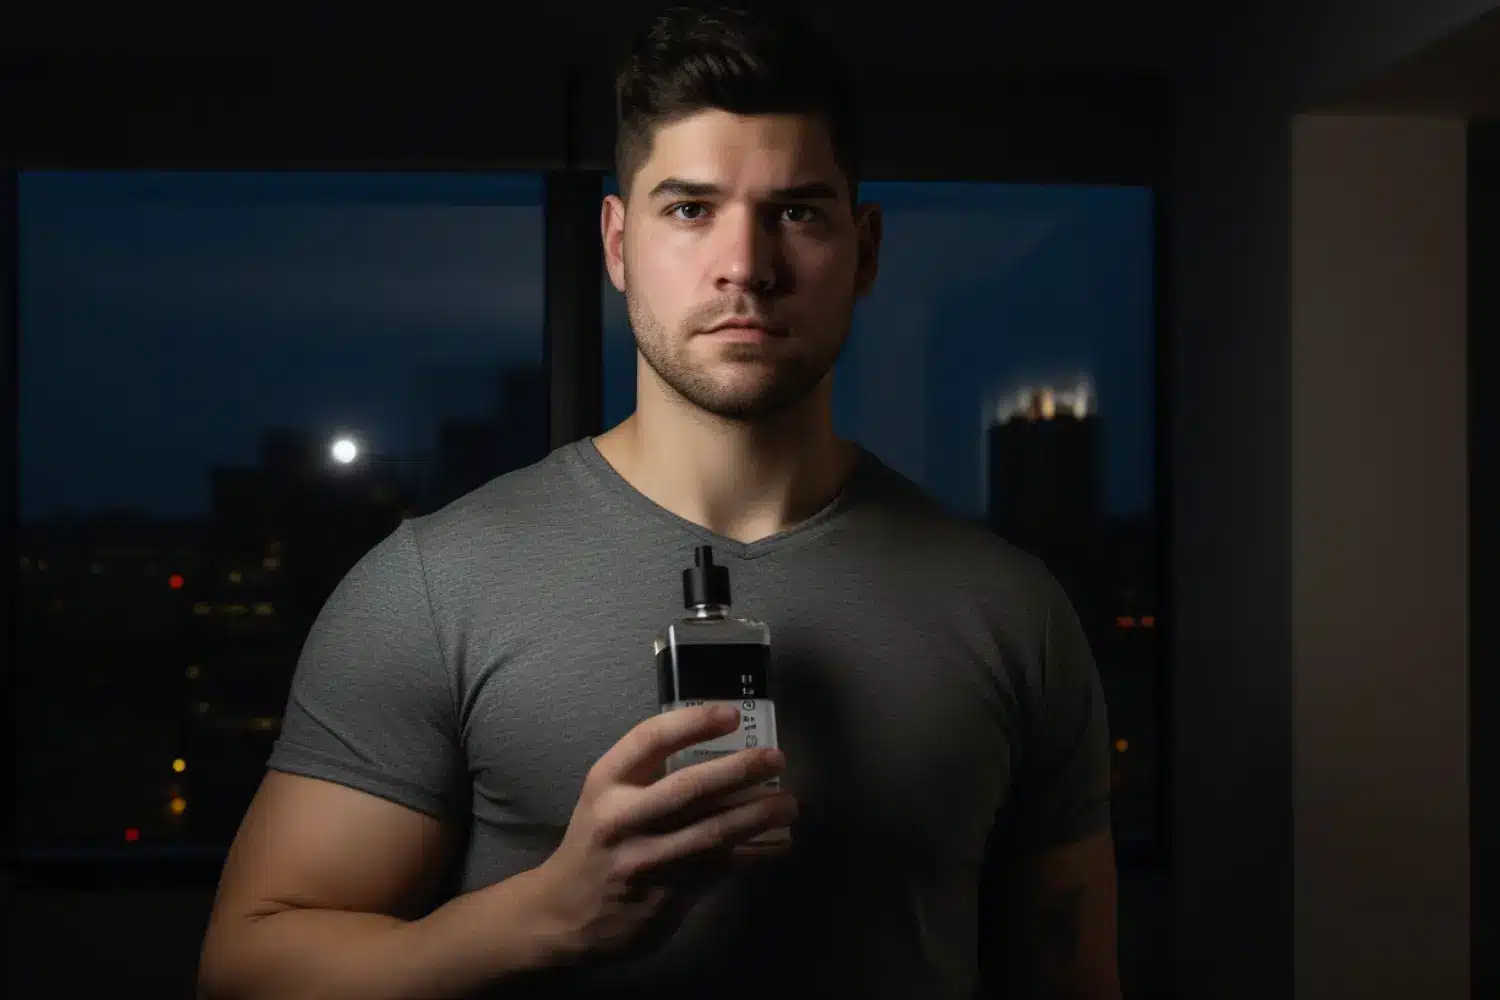 man holding a bottle of cologne